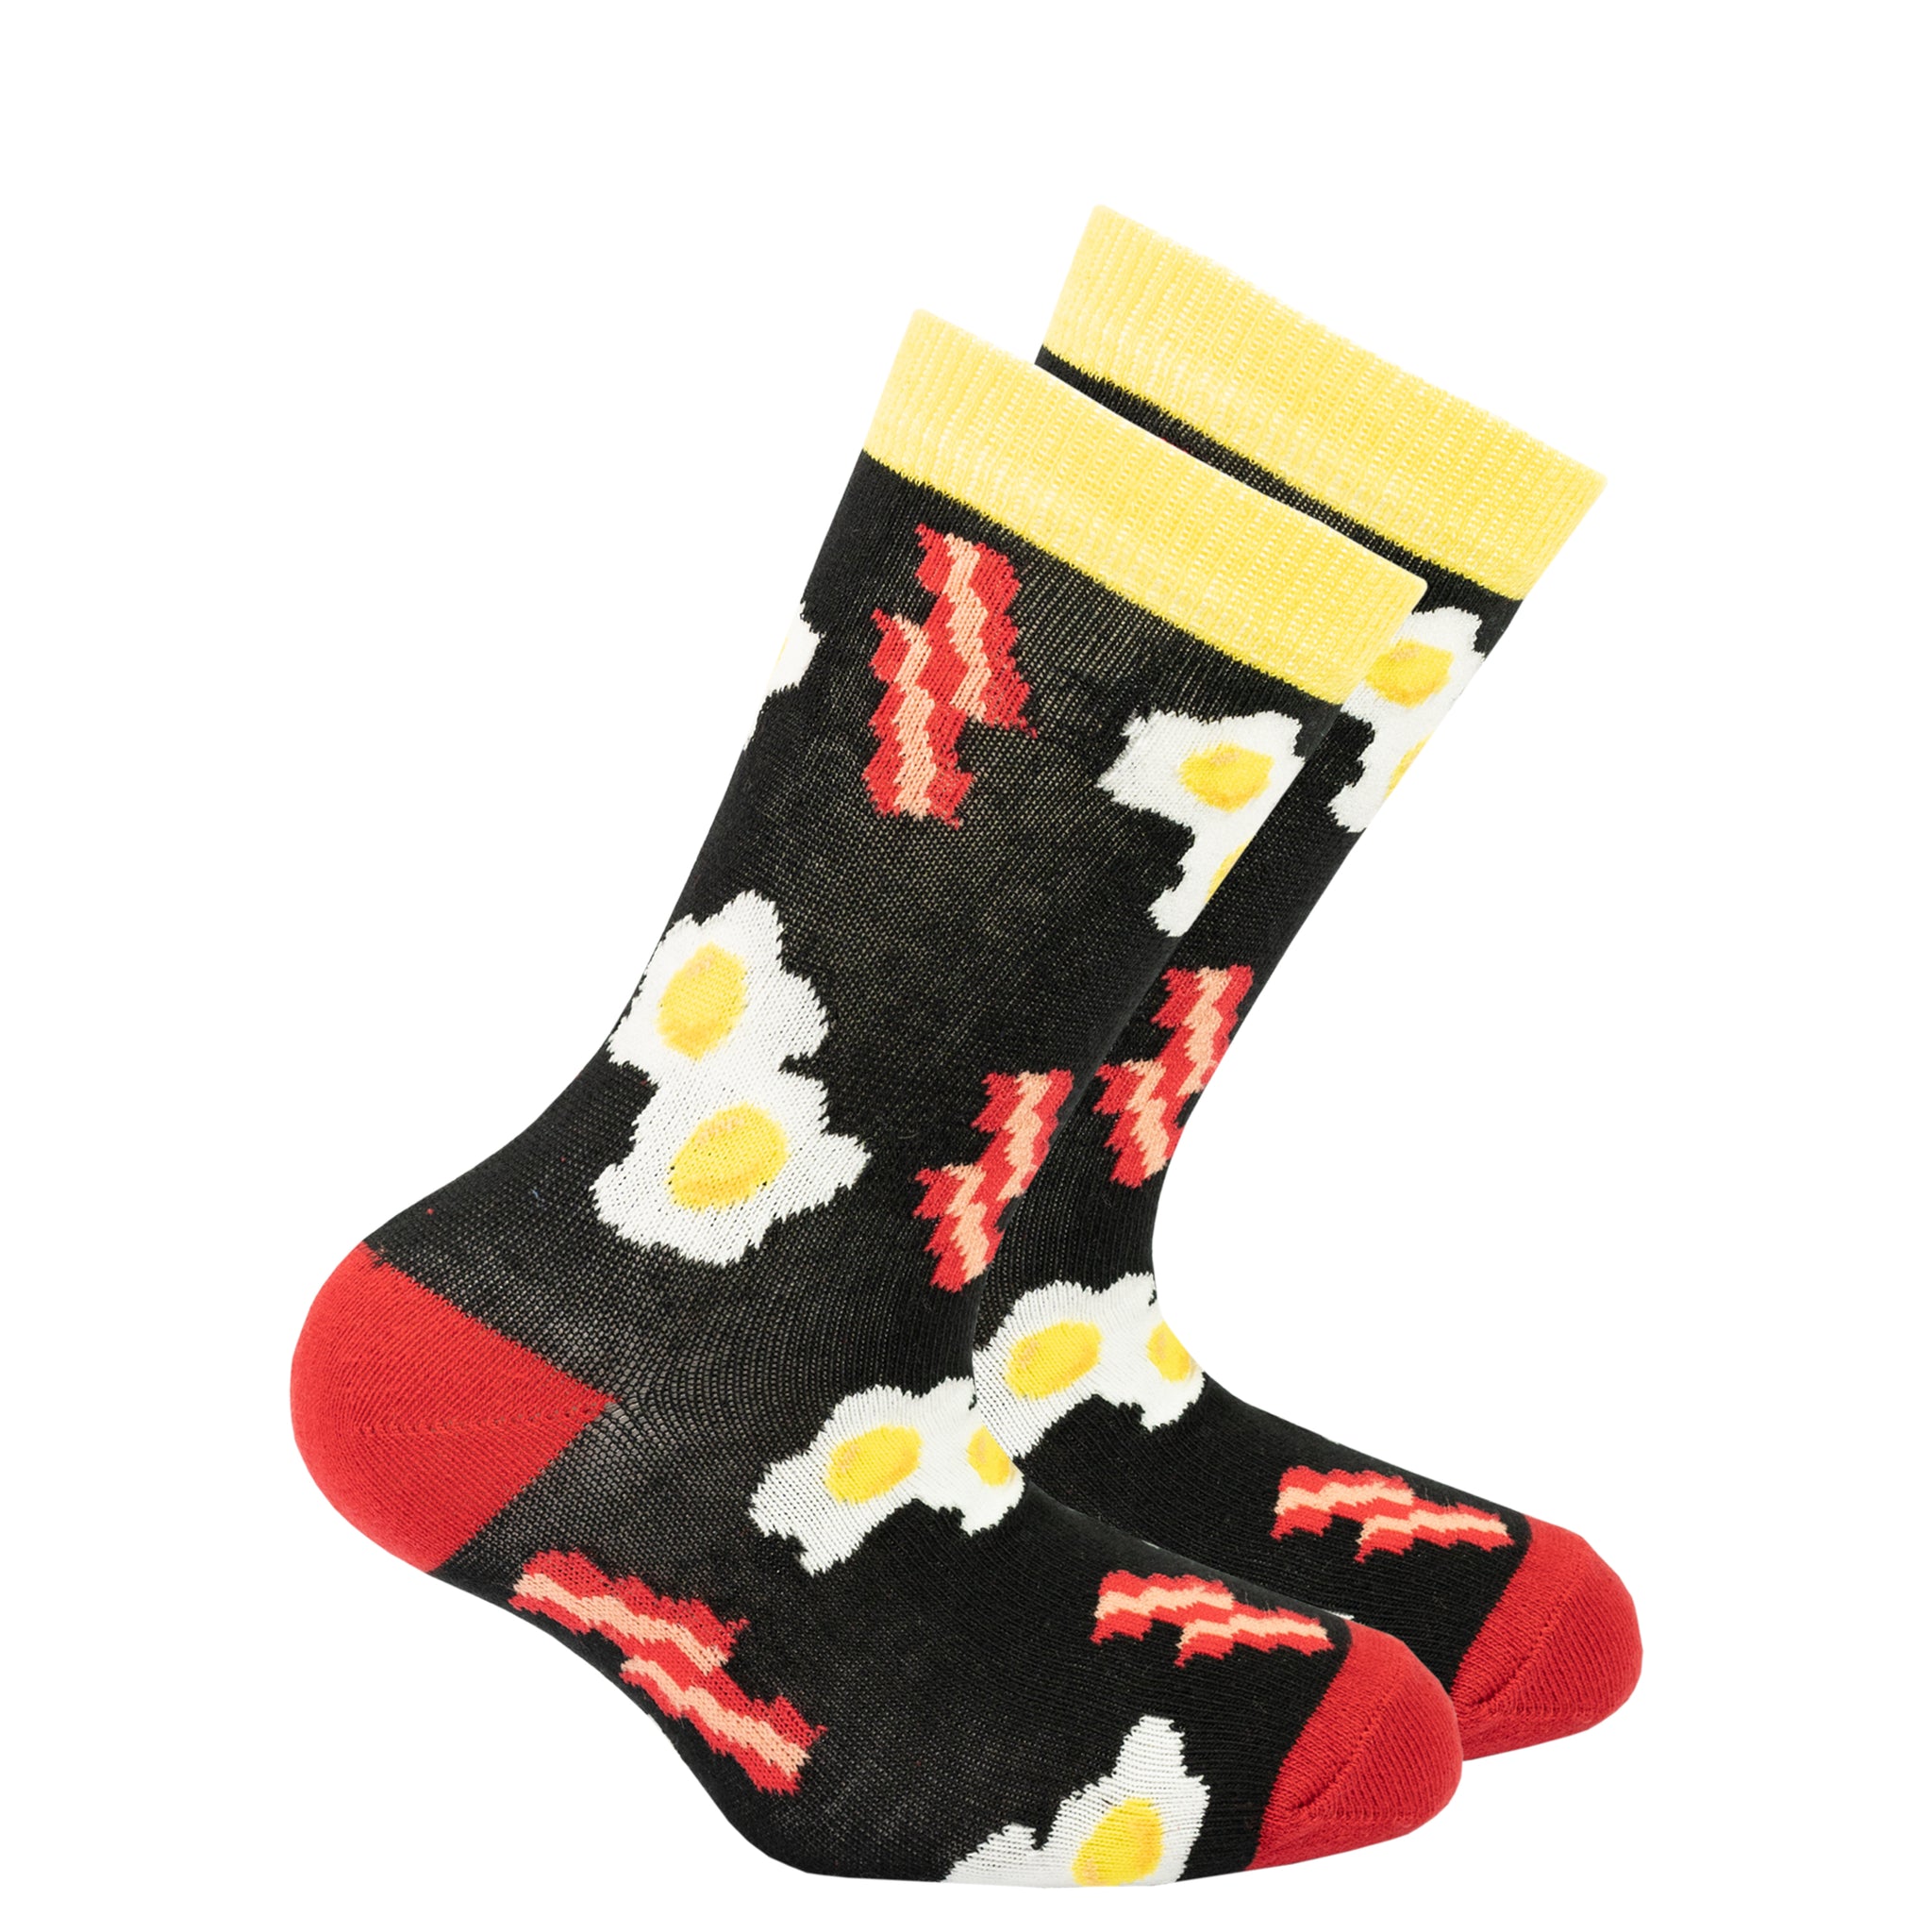 Kids Bacon & Eggs Socks black red and yellow